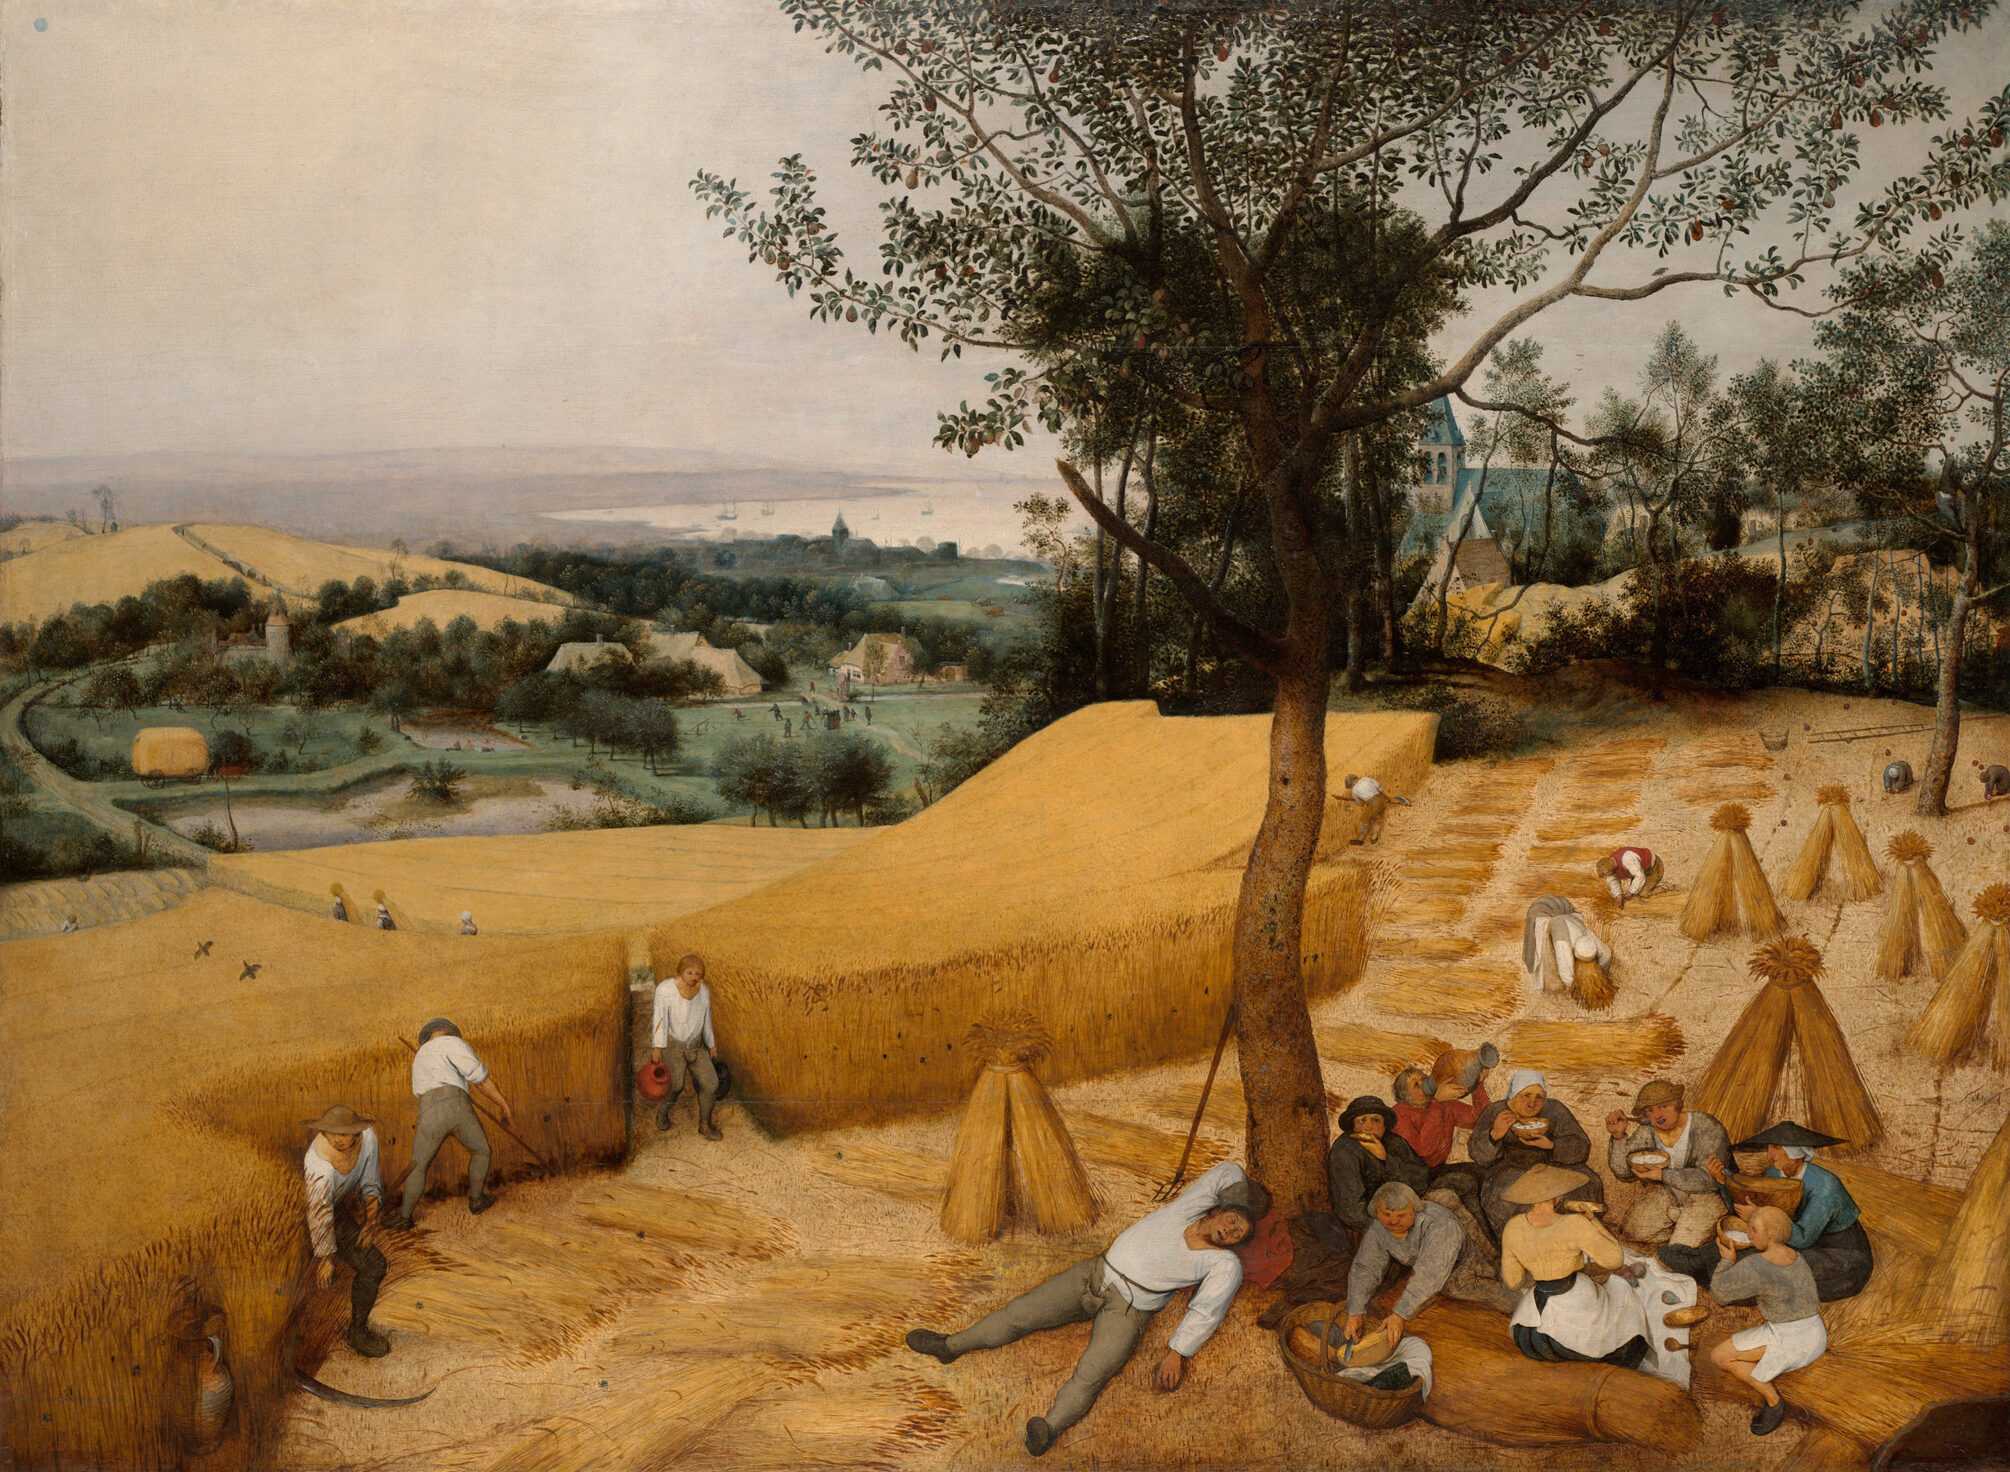 A painting of peasants working in a wheat field in the Netherlands. Some are resting under a tree.